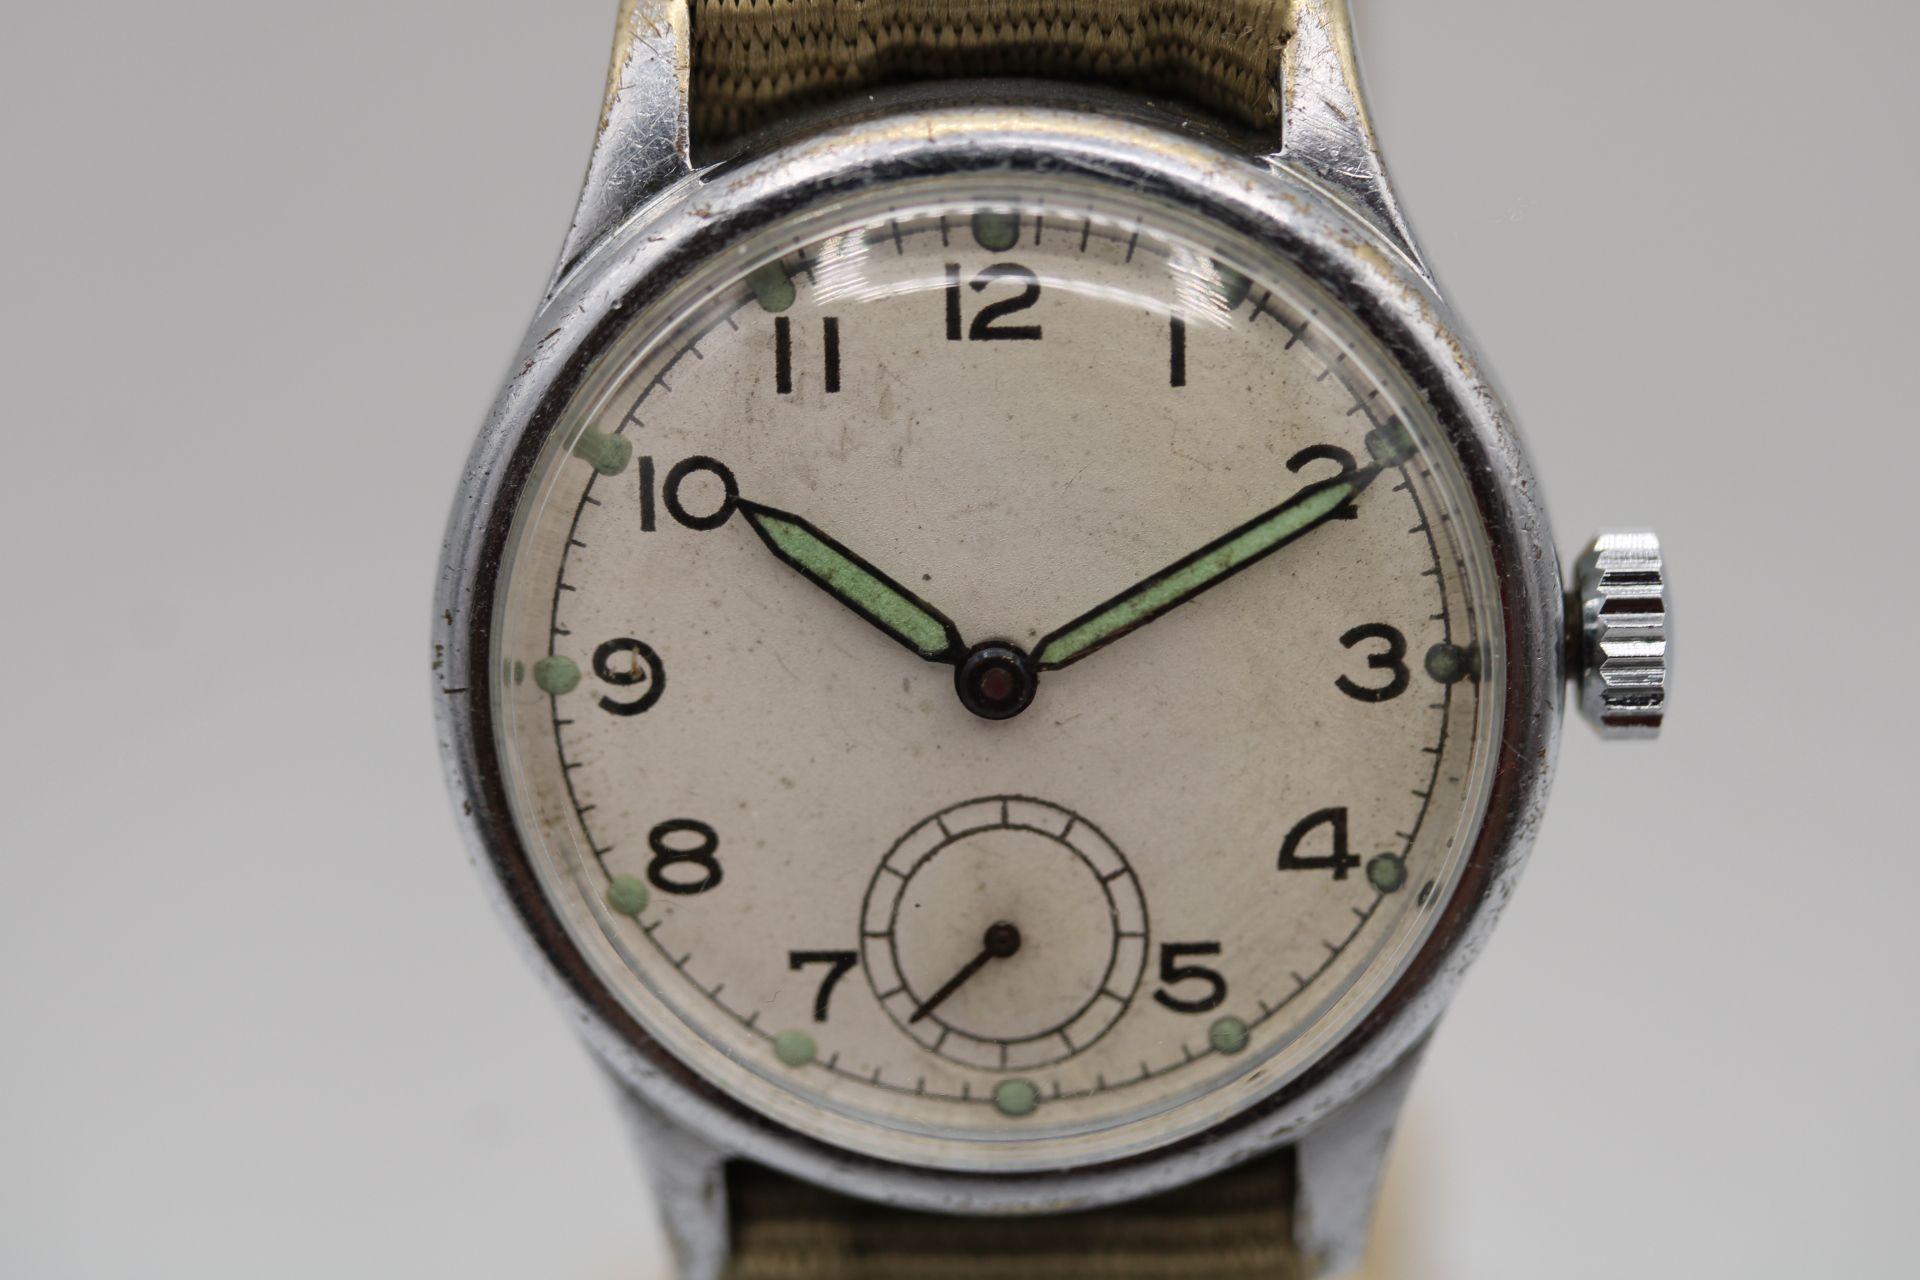 A rare find and even more so with an unsigned dial, we know its Grana from the Movement markings and we know its a 15 Jewel K.F.320 movement. ATP style watch made exclusively for the British Military as long back as the 1940's (although we cant be